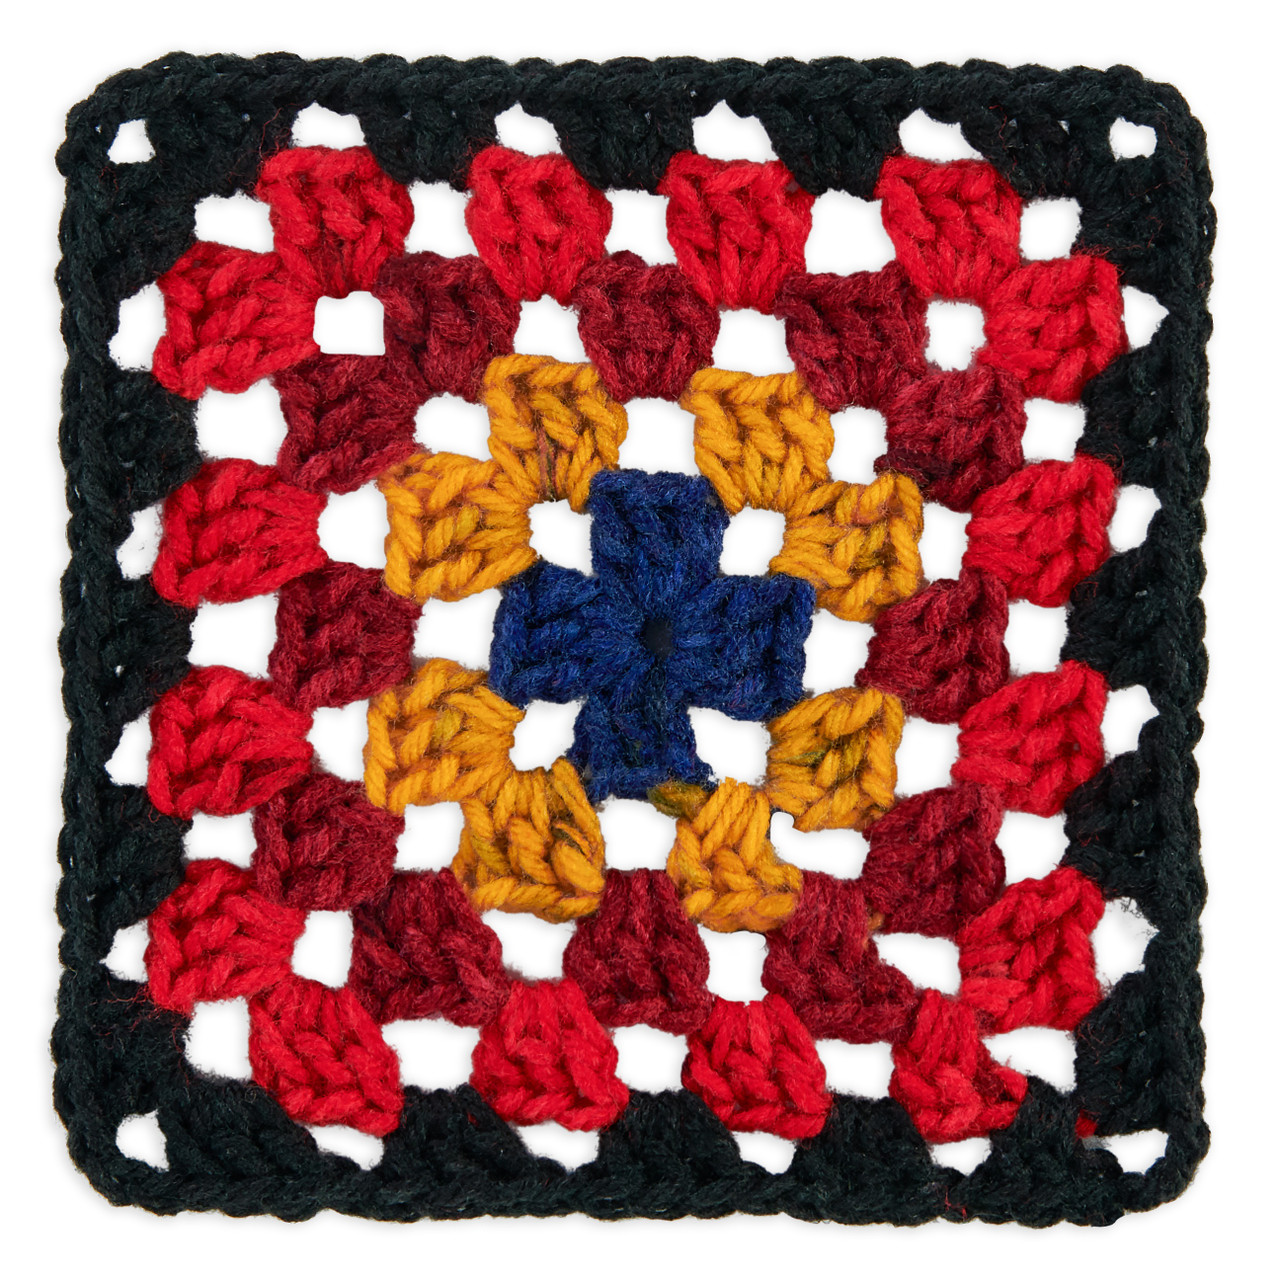 Red Heart All in One Granny Square-Black Moody Cherry E310GS-2019 -  GettyCrafts